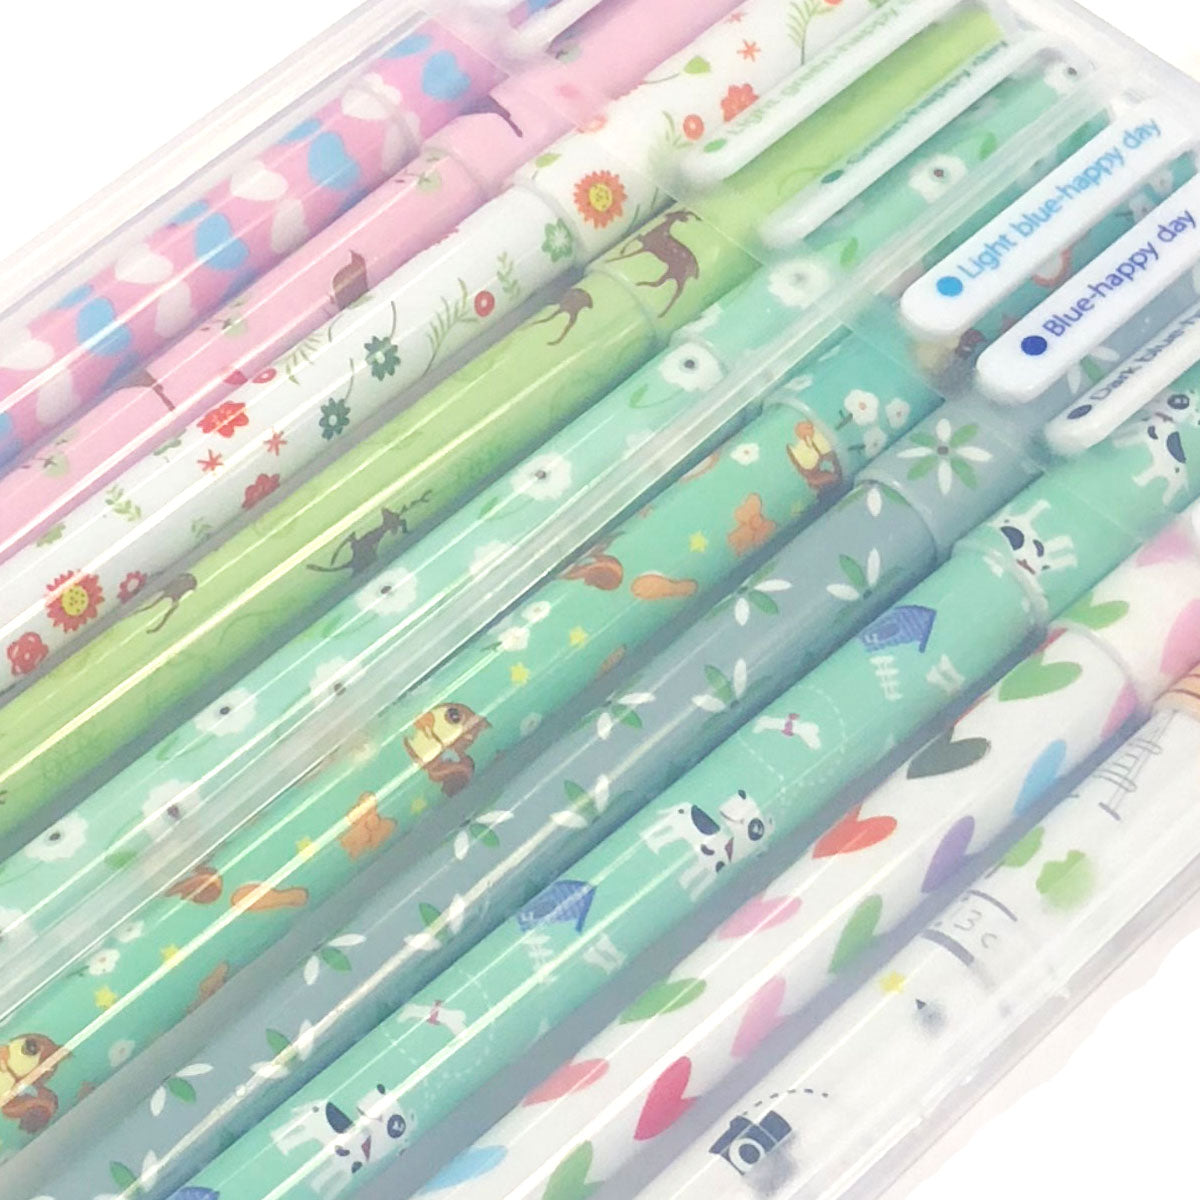 Wrapables Novelty Sticker Machine Pens, Decorative Stationery Supplies for  Home Office School, Galaxy 